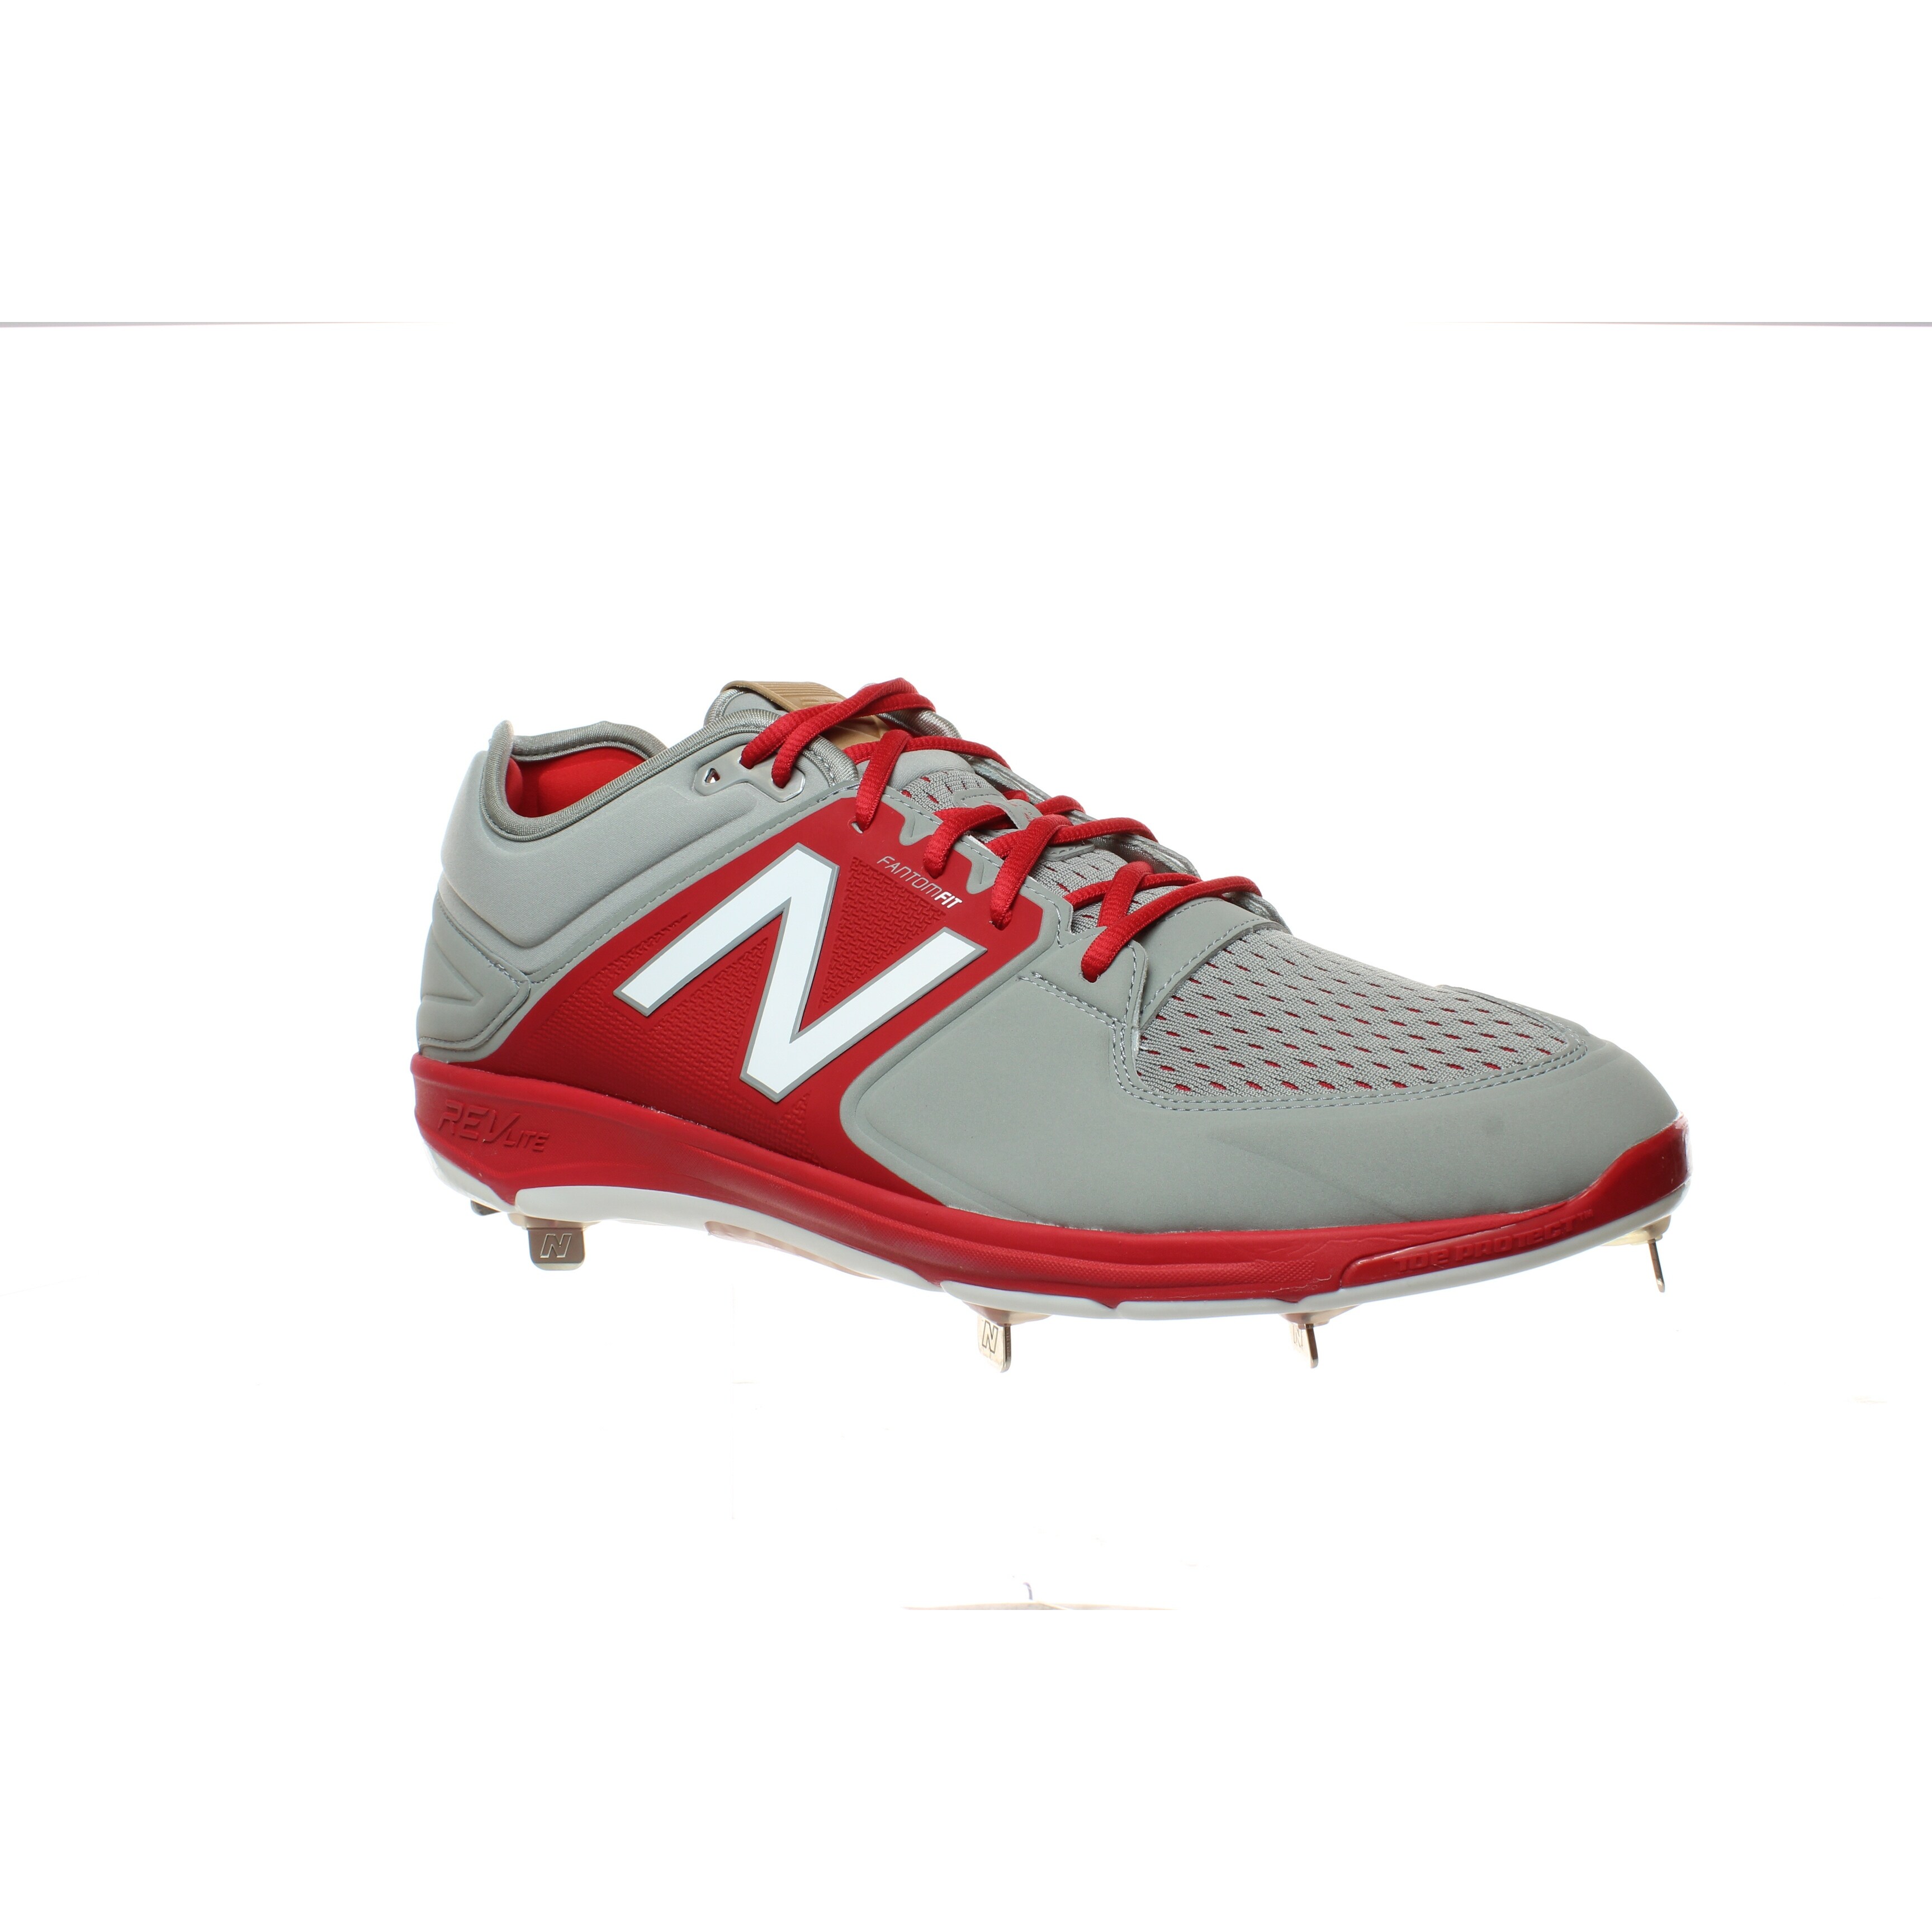 new balance red and black baseball cleats